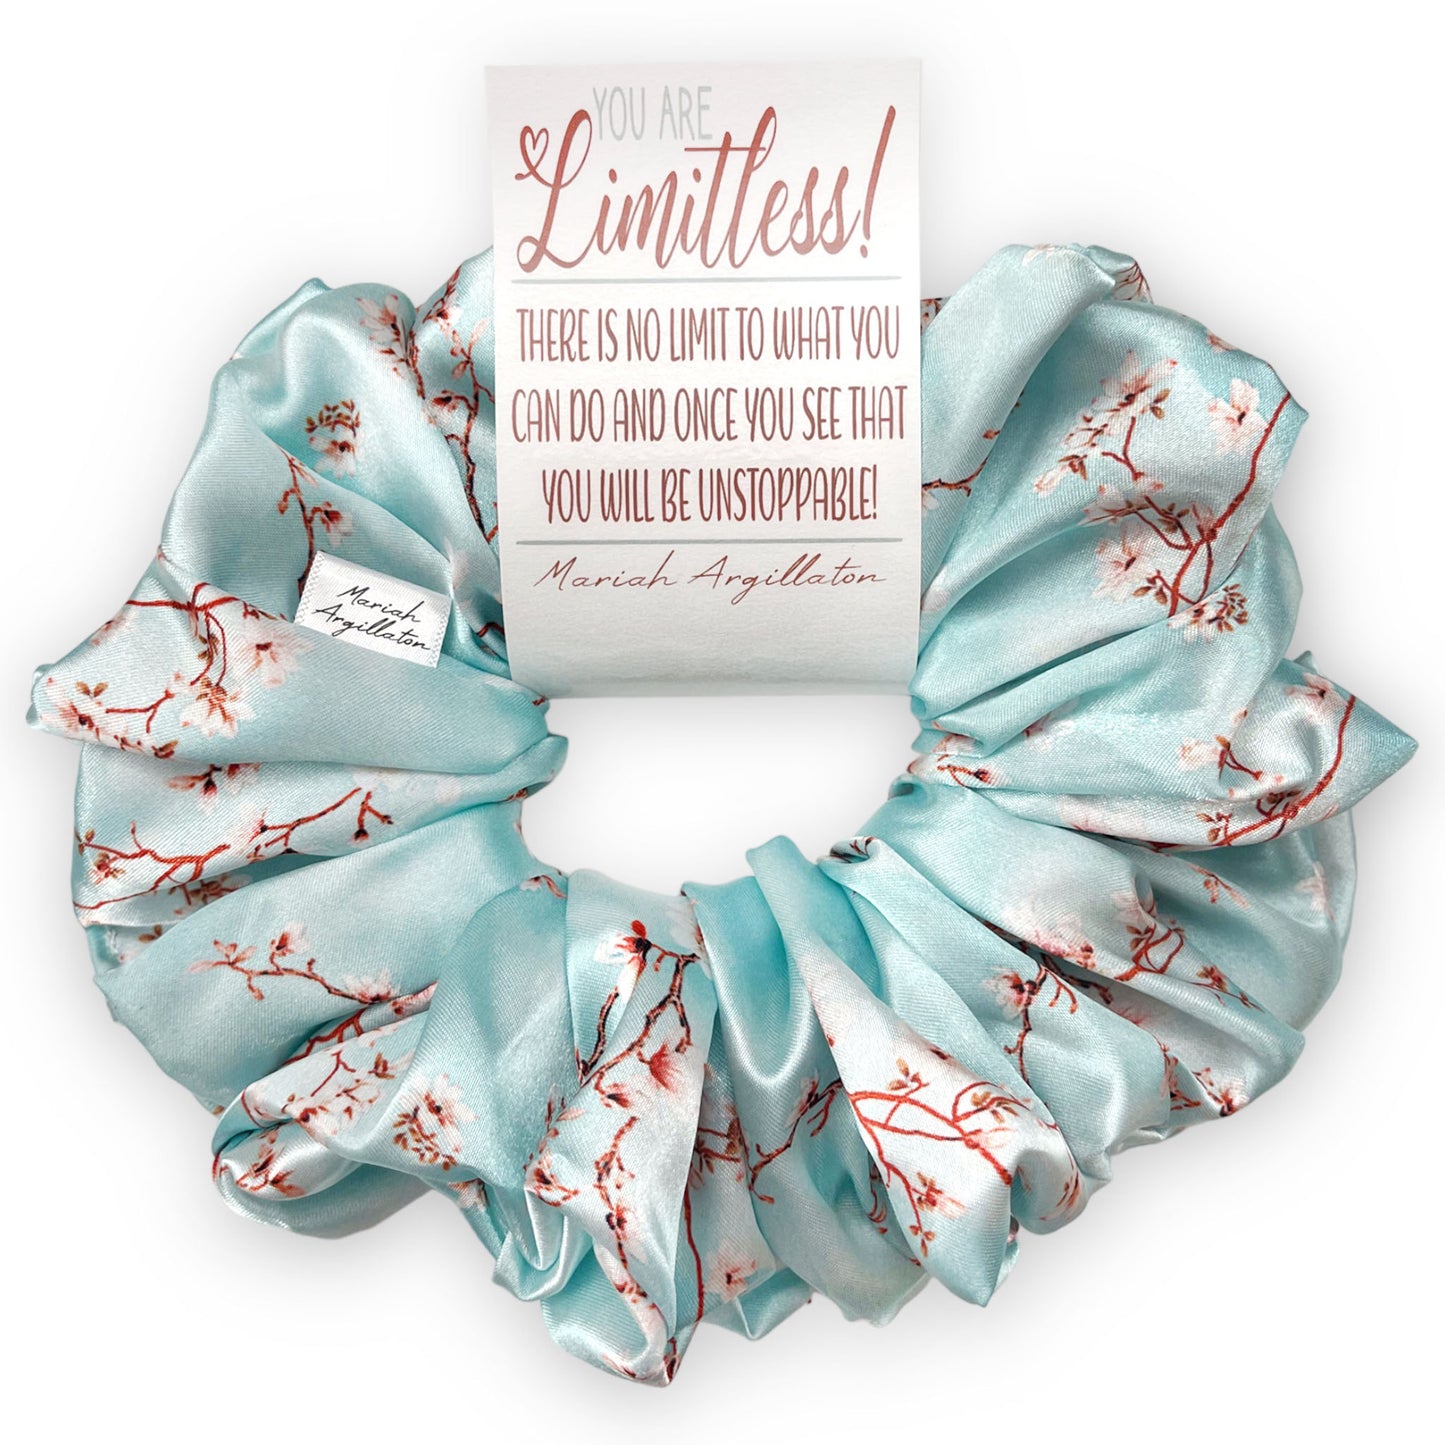 You Are Limitless! XL Scrunchie!